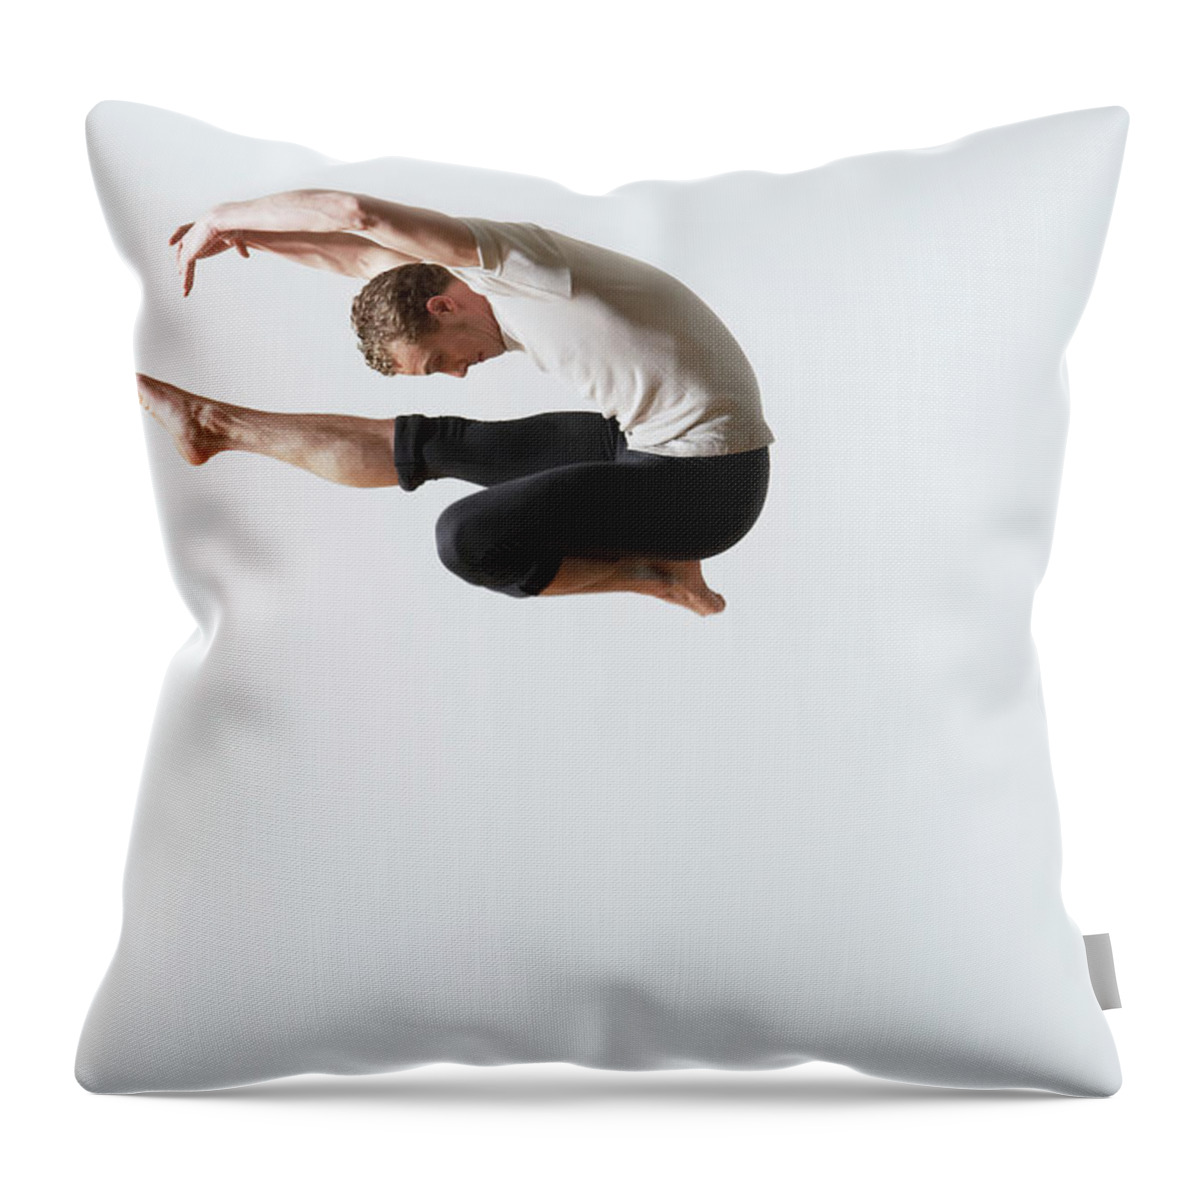 Ballet Dancer Throw Pillow featuring the photograph Leaping Ballet Dancer In Mid-air by Moodboard